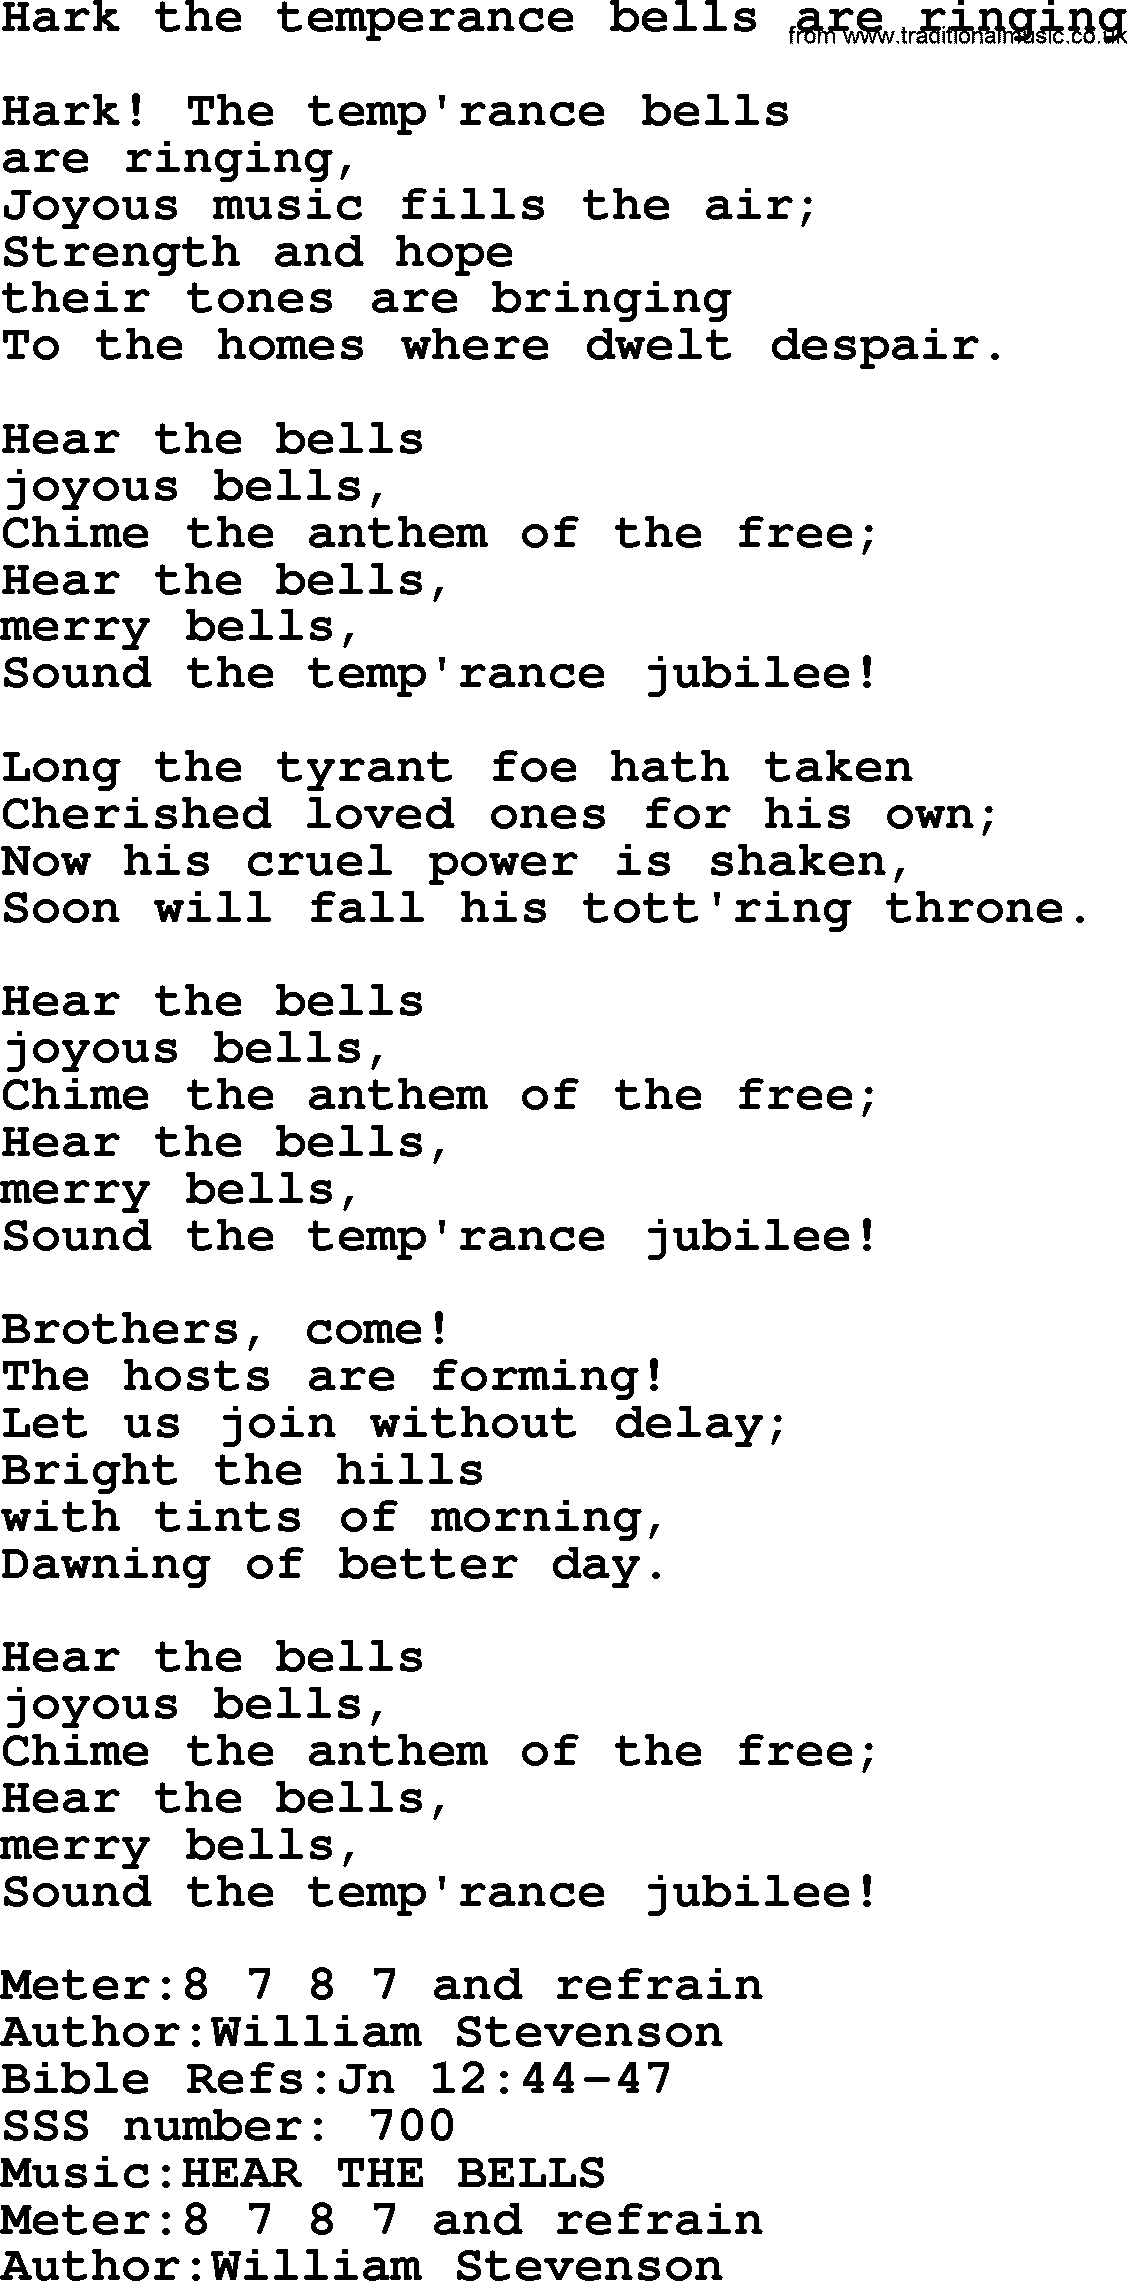 Sacred Songs and Solos complete, 1200 Hymns, title: Hark The Temperance Bells Are Ringing, lyrics and PDF